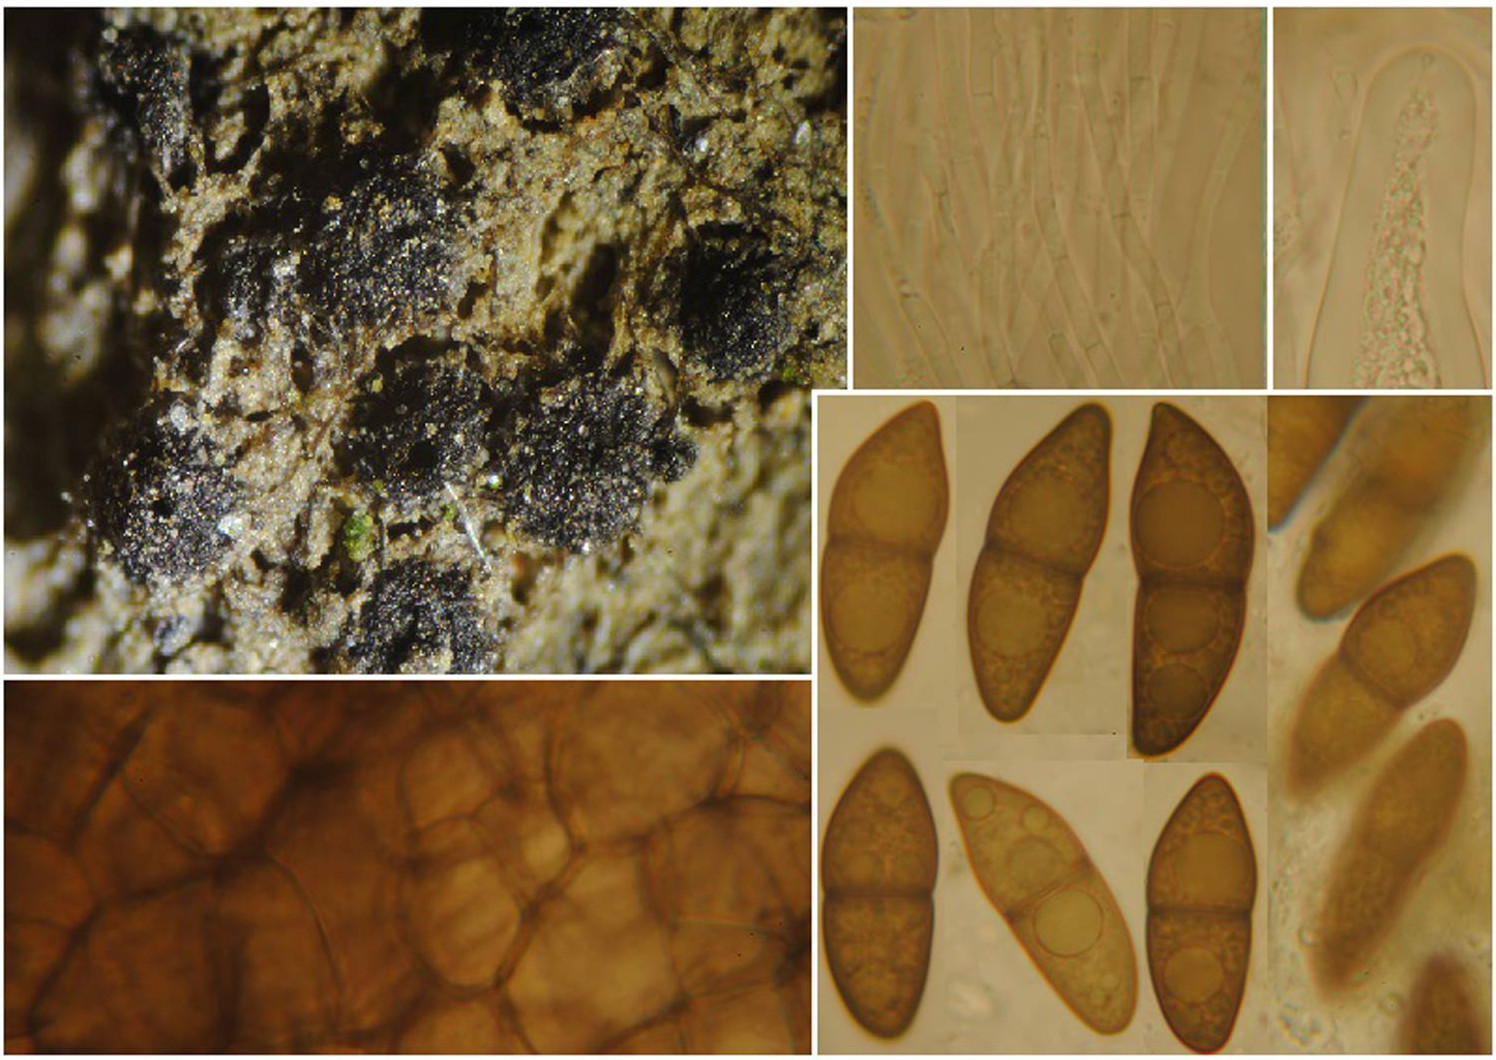 Jahnula aquatica, composite image of a collection on rotten submerged wood from VC17 Surrey.